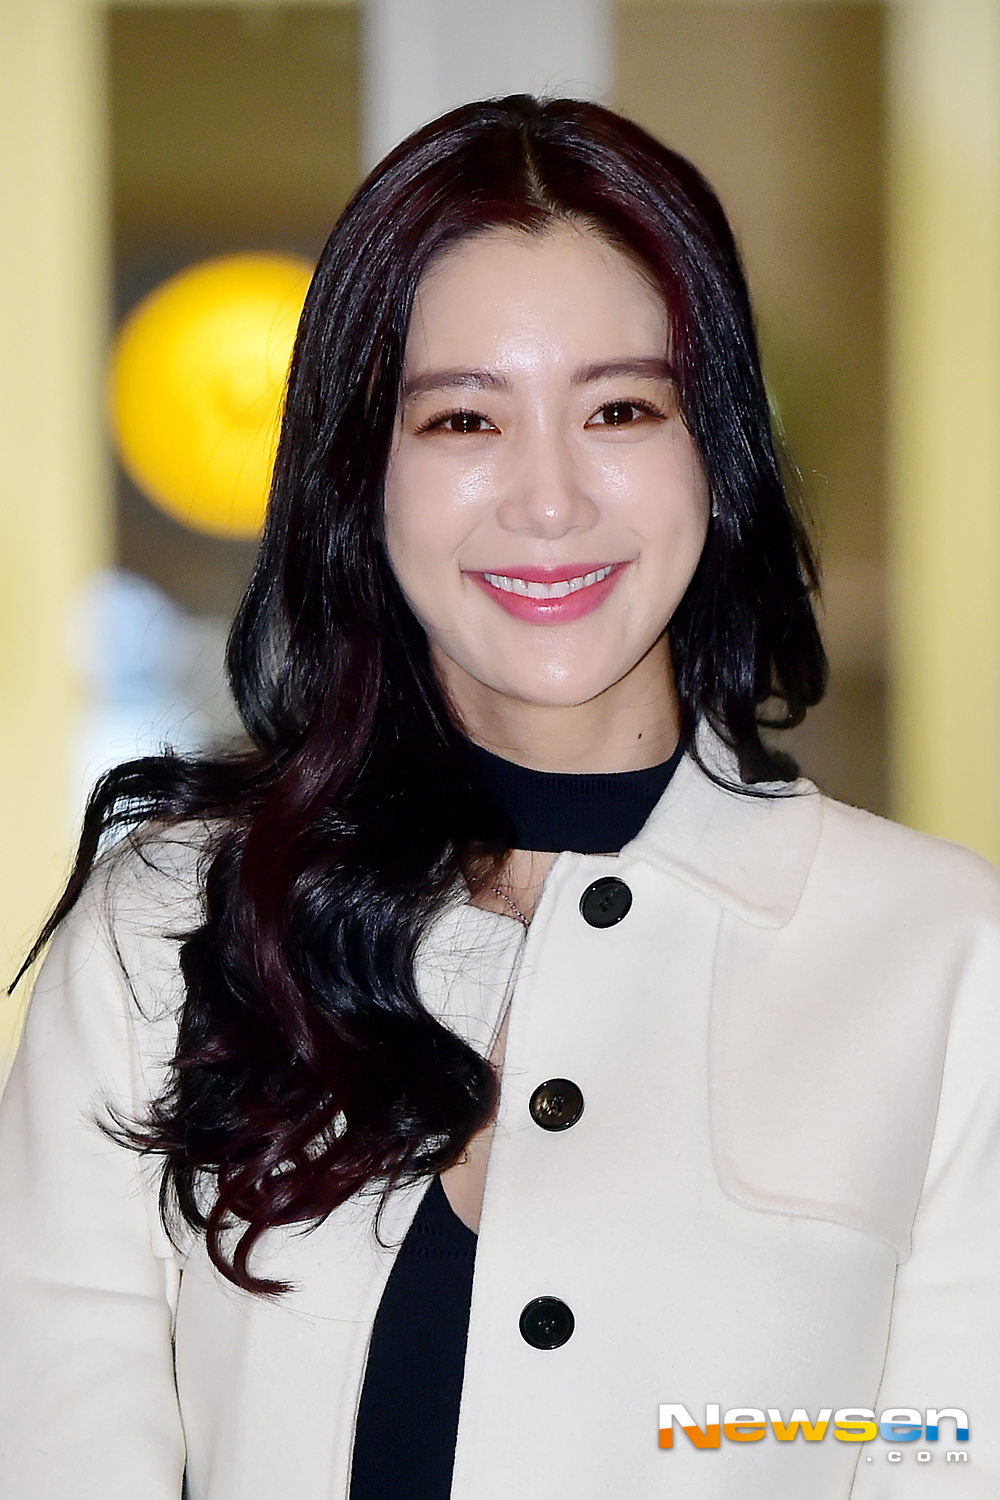 Actor Clara left for United States of America Los Angeles on the afternoon of January 4 for a wedding ceremony with a 2-year-old Korean-American businessman on the 6th (United States of America time) through the Incheon International Airport in Unseo-dong, Jung-gu, Incheon.Actor Clara is leaving for United States of America Los Angeles with an airport fashion show.exponential earthquake